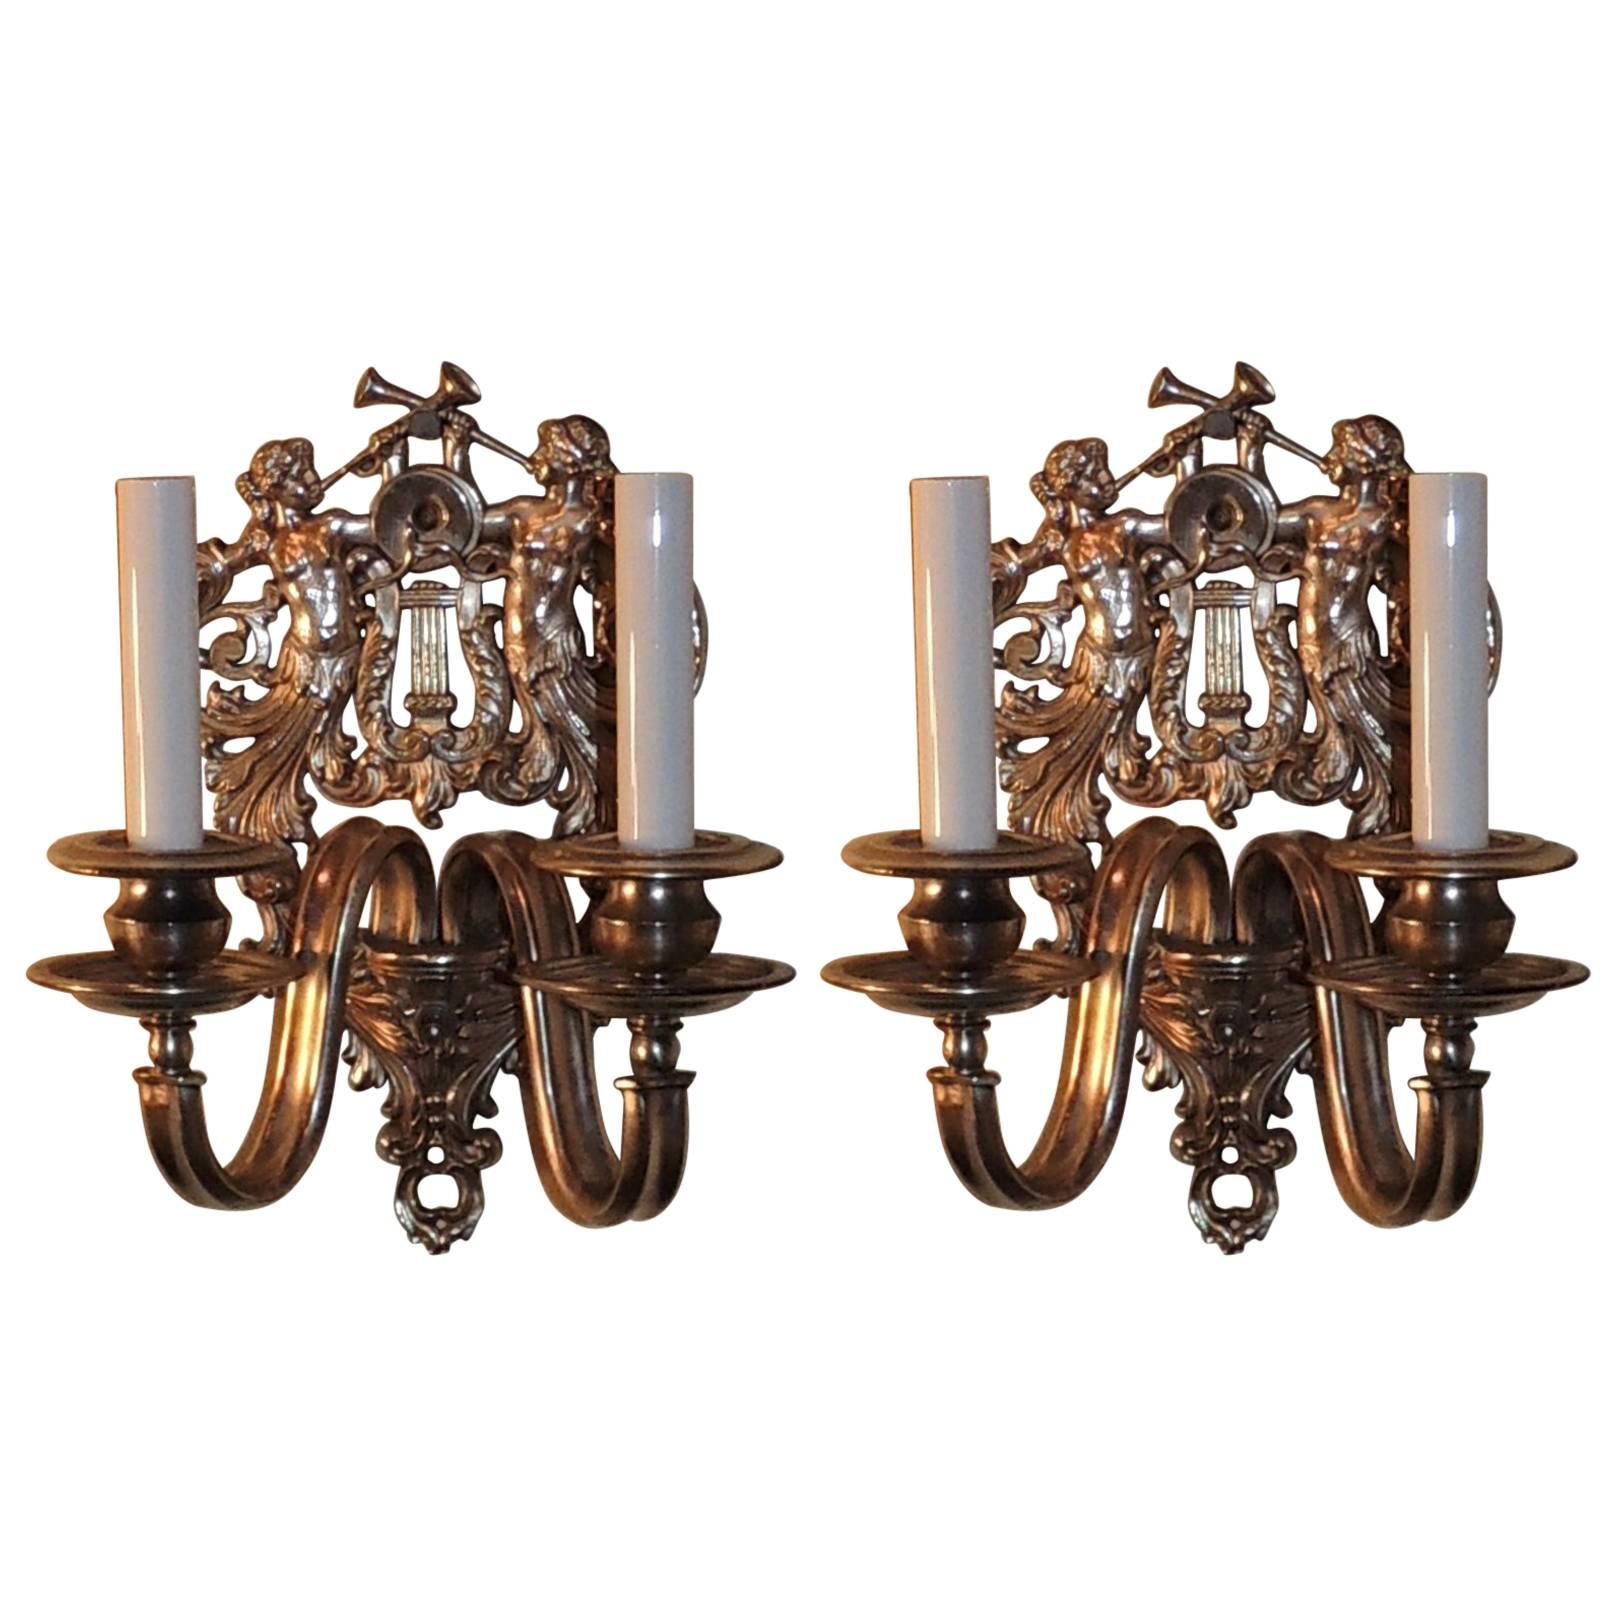 Wonderful Pair of Two-Light Silvered Bronze Figural Trumpets Caldwell Sconces For Sale